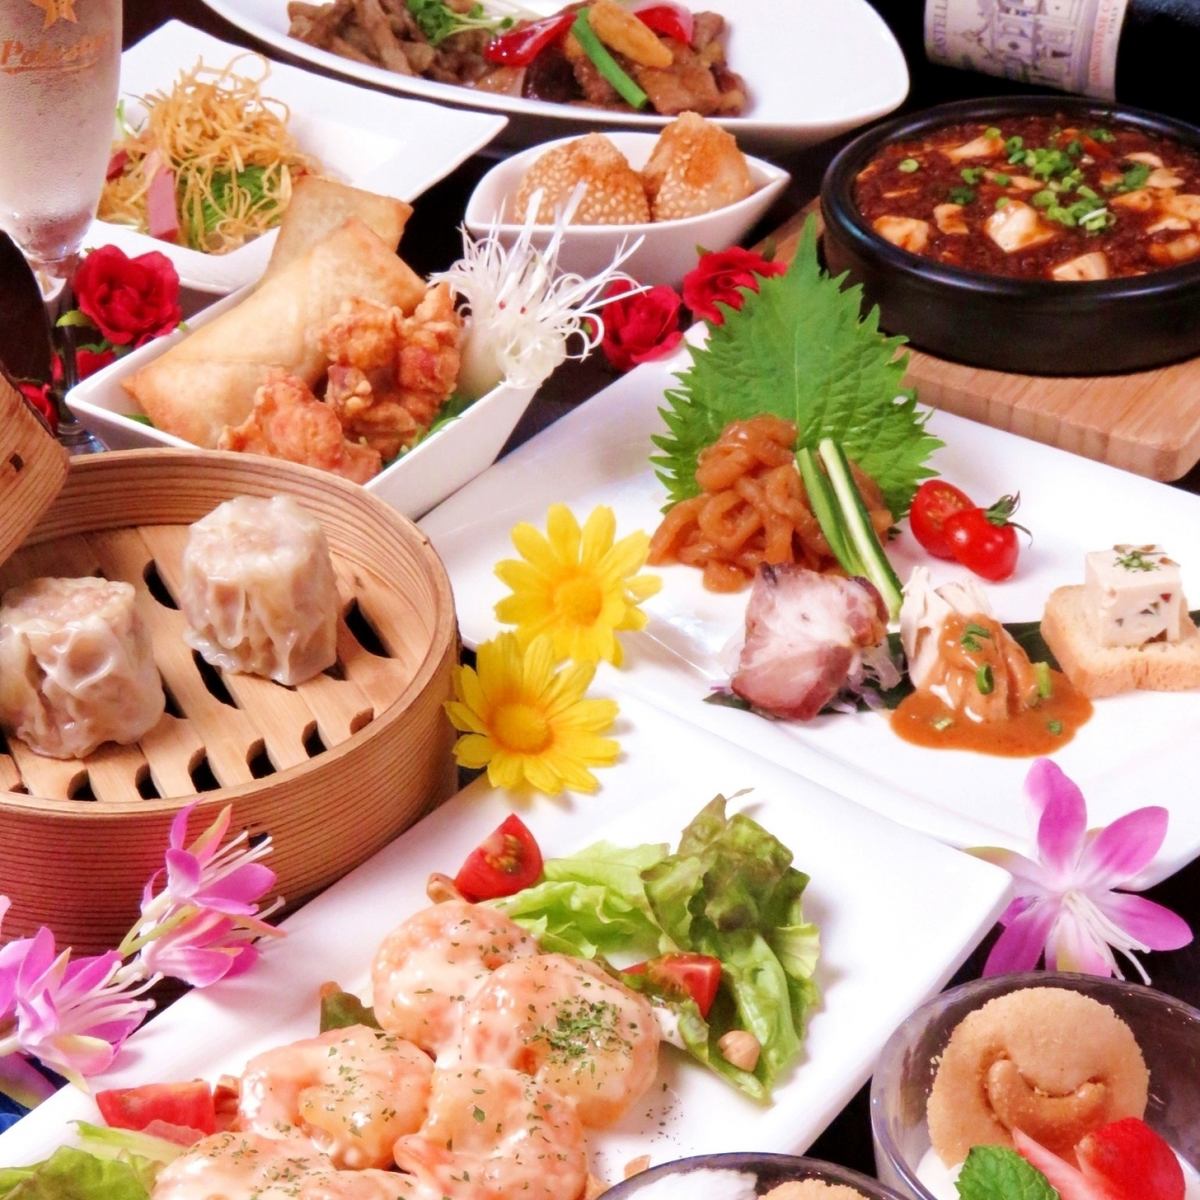 Enjoy Chinese food easily during the banquet season!